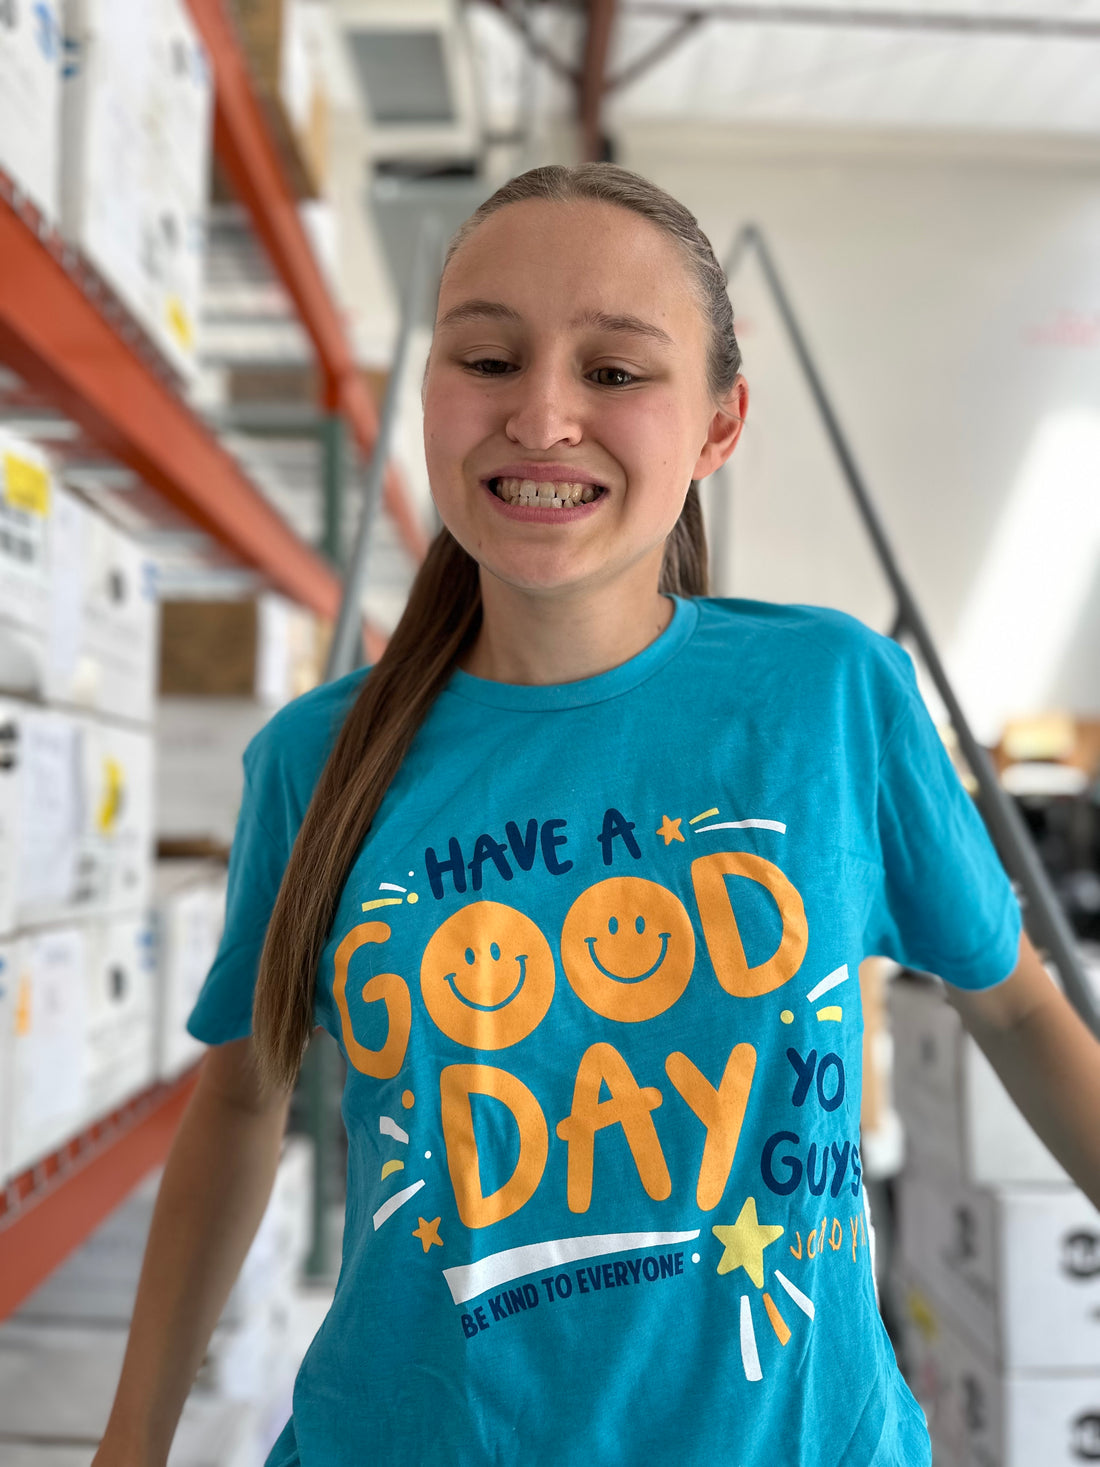 Our Have a Good Day You Guys Be Kind to Everyone® short-sleeved tee comes in a pretty bondi blue.